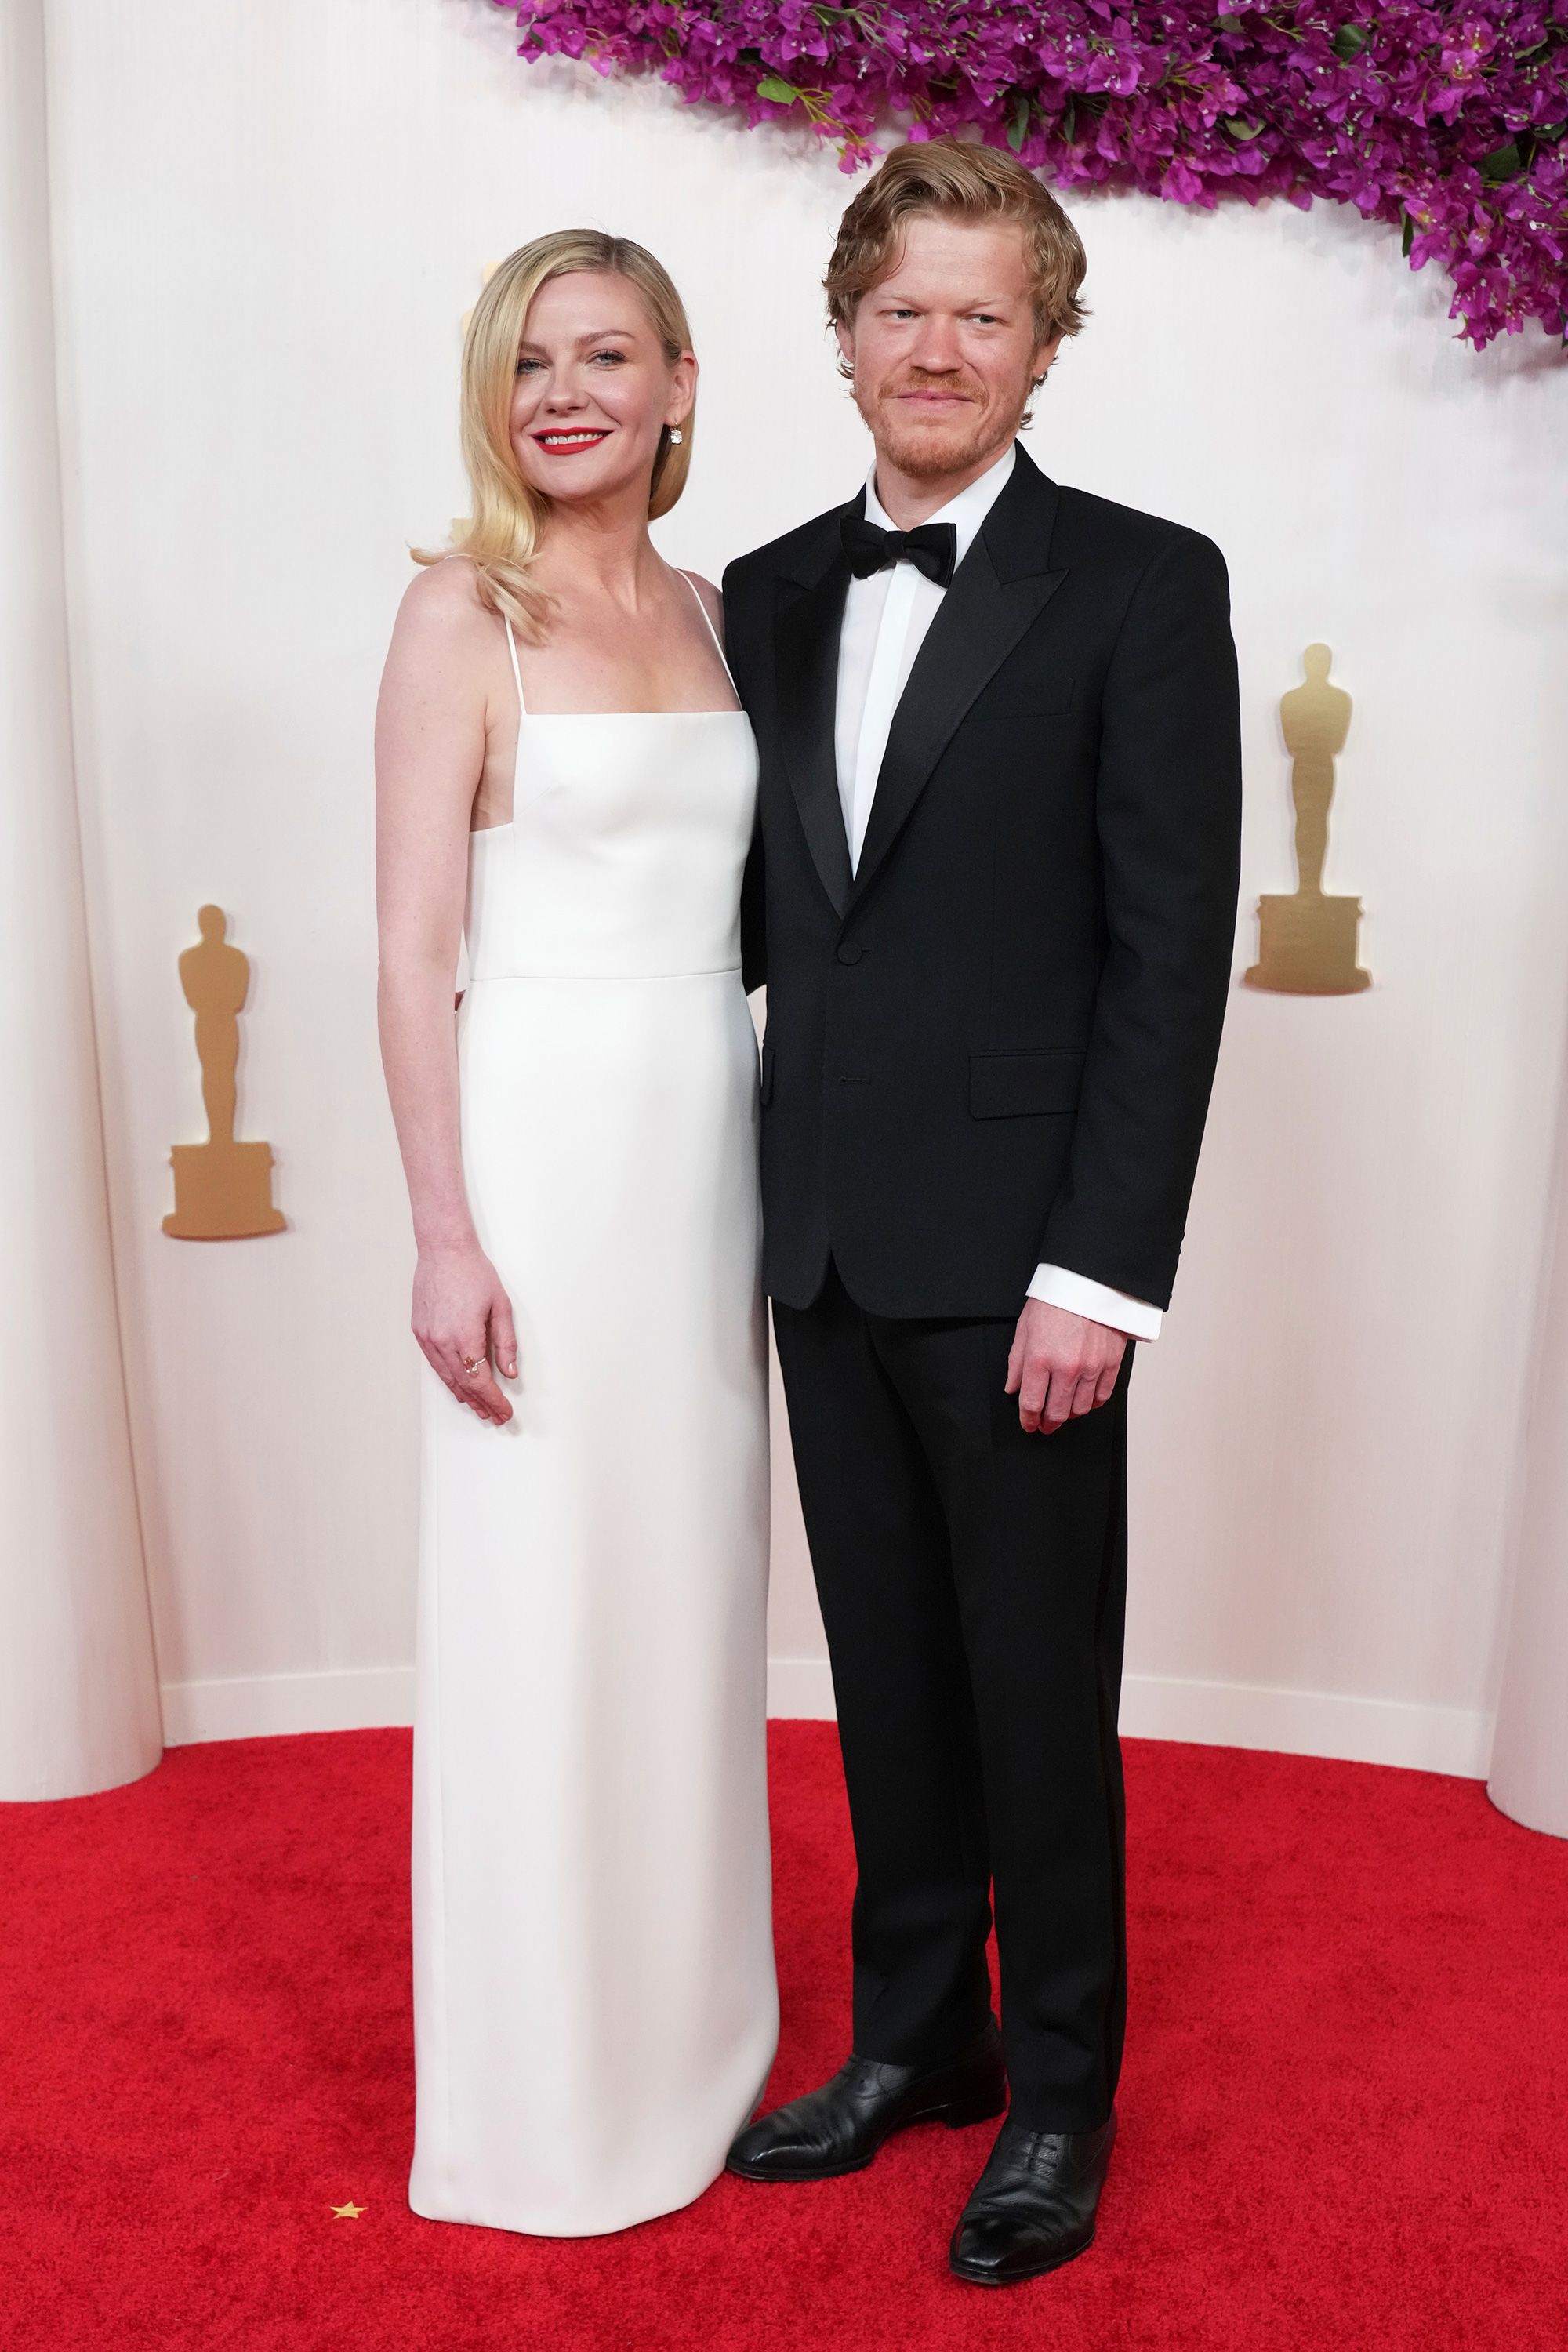 Kirsten Dunst, who arrived with husband Jesse Plemons, wore an elegant Gucci dress with a sharp-edged neckline and an elegant floor-length silhouette.  The actor completed the look with Fred Leighton jewelry.